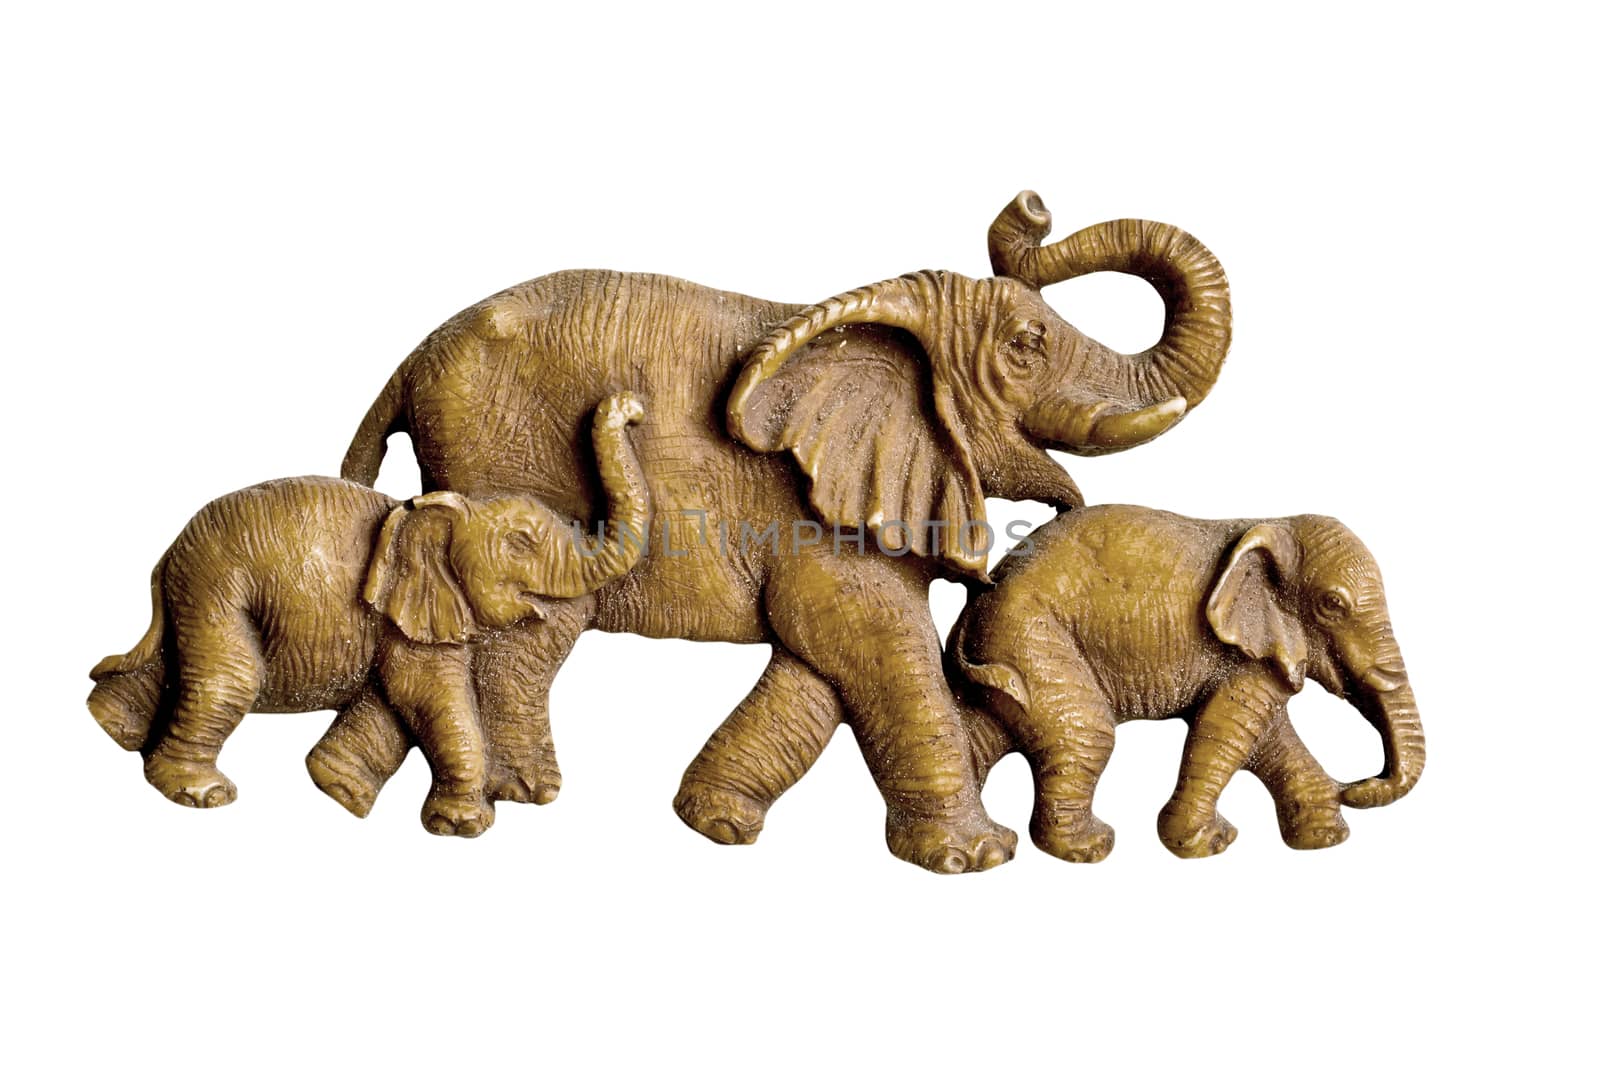 Carved wooden elephant on white background